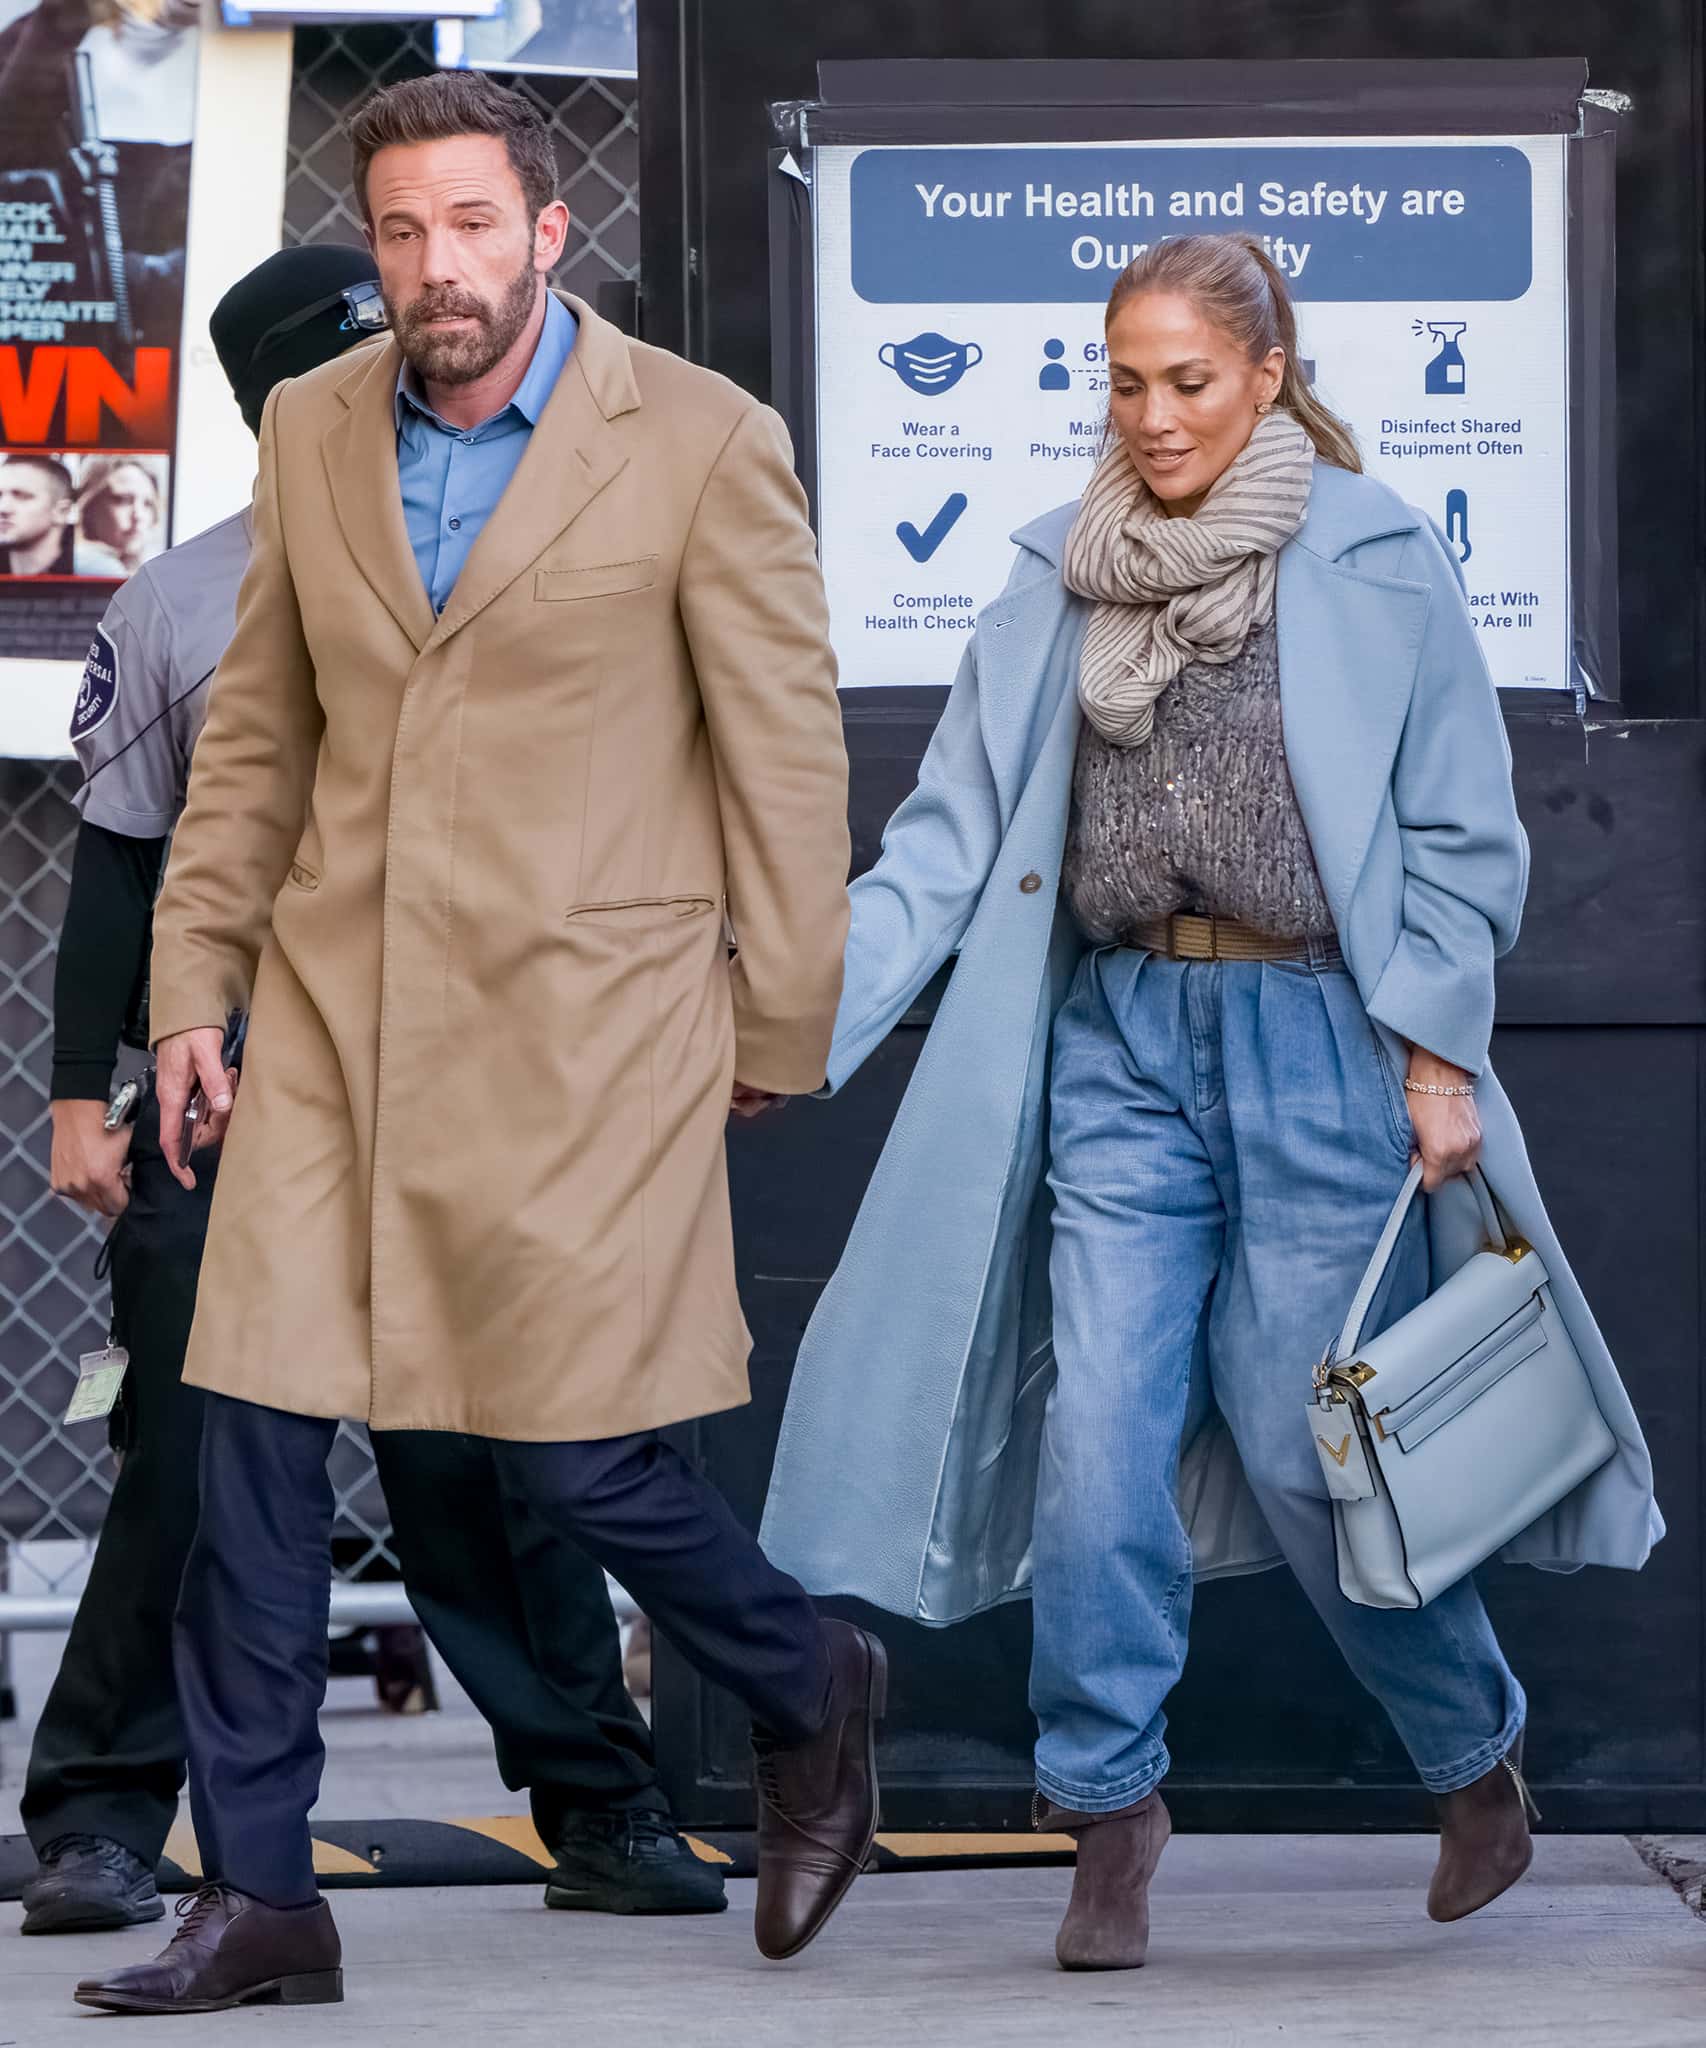 Ben Affleck bundles up in a tan coat while J.Lo keeps warm in a blue coat with a cable-knit sweater, a striped scarf, and a pair of jeans